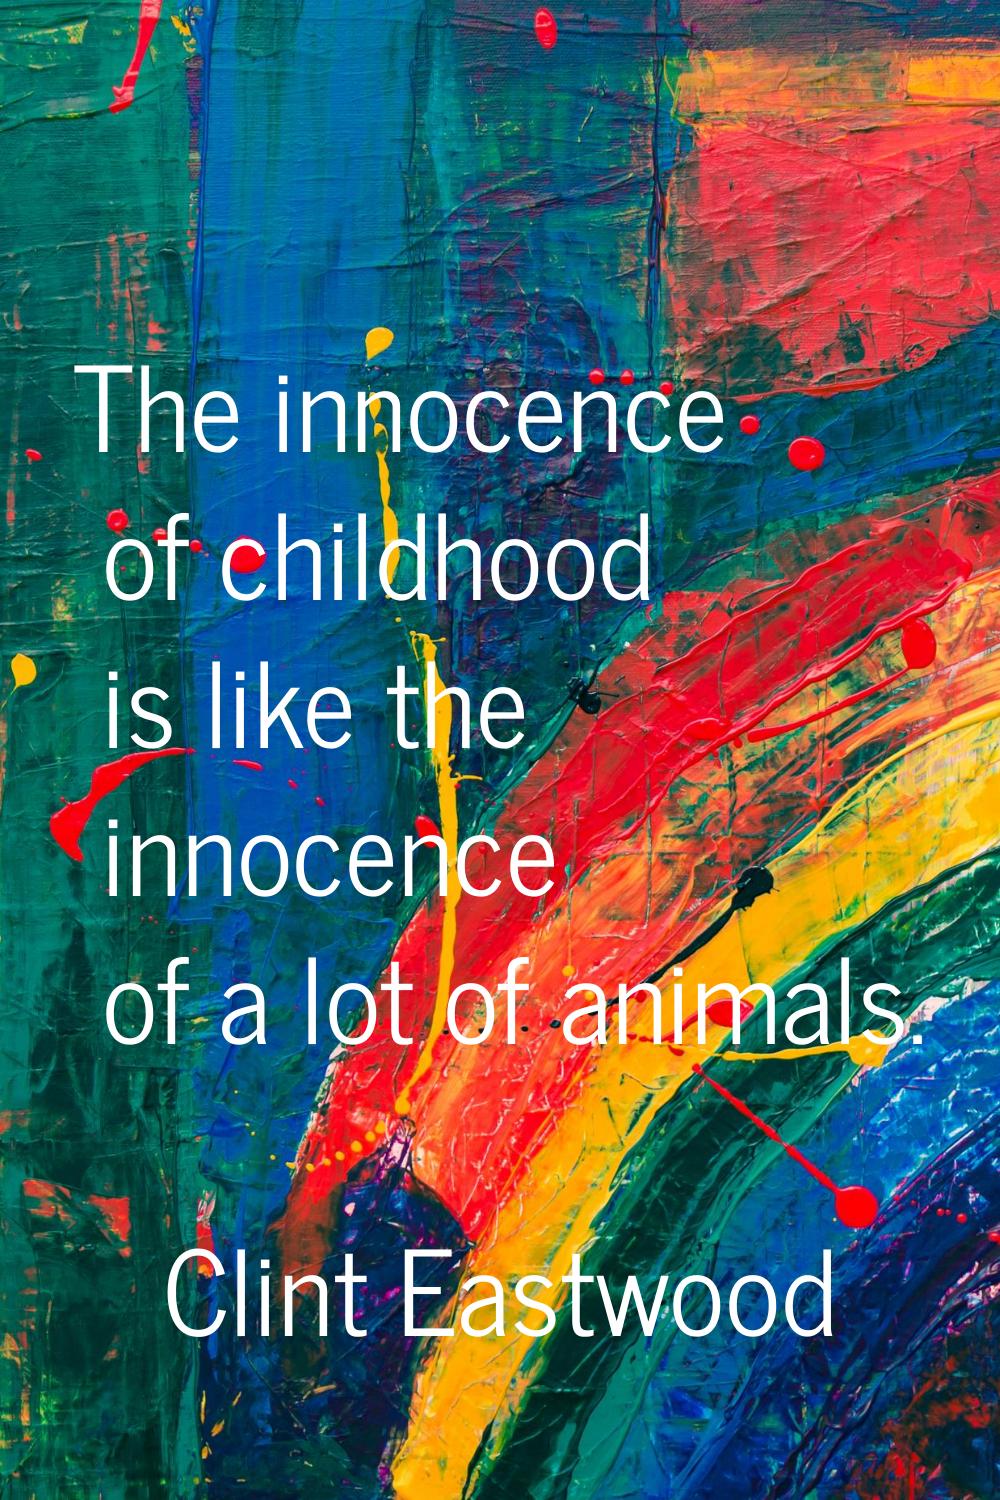 The innocence of childhood is like the innocence of a lot of animals.